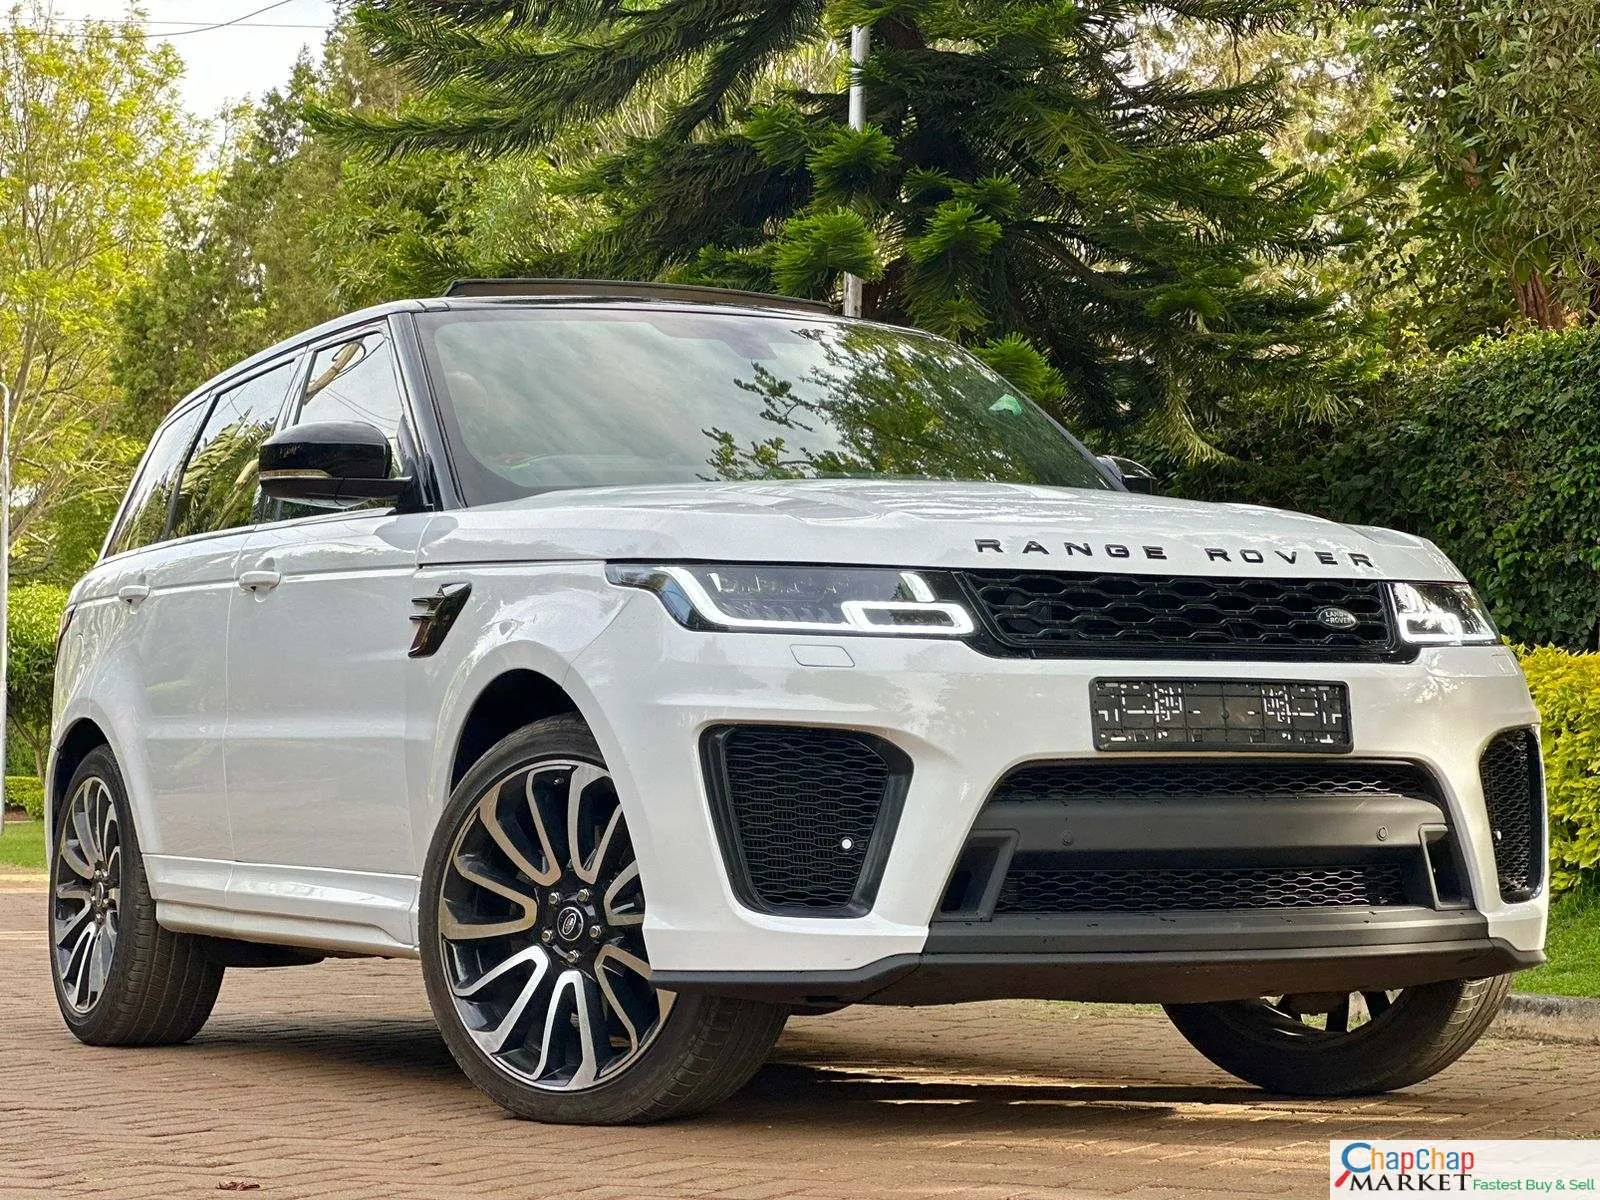 Cars Cars For Sale/Vehicles-Range Rover Sport Petrol Just ARRIVED QUICK SALE You pay 30% deposit Trade in OK EXCLUSIVE 9